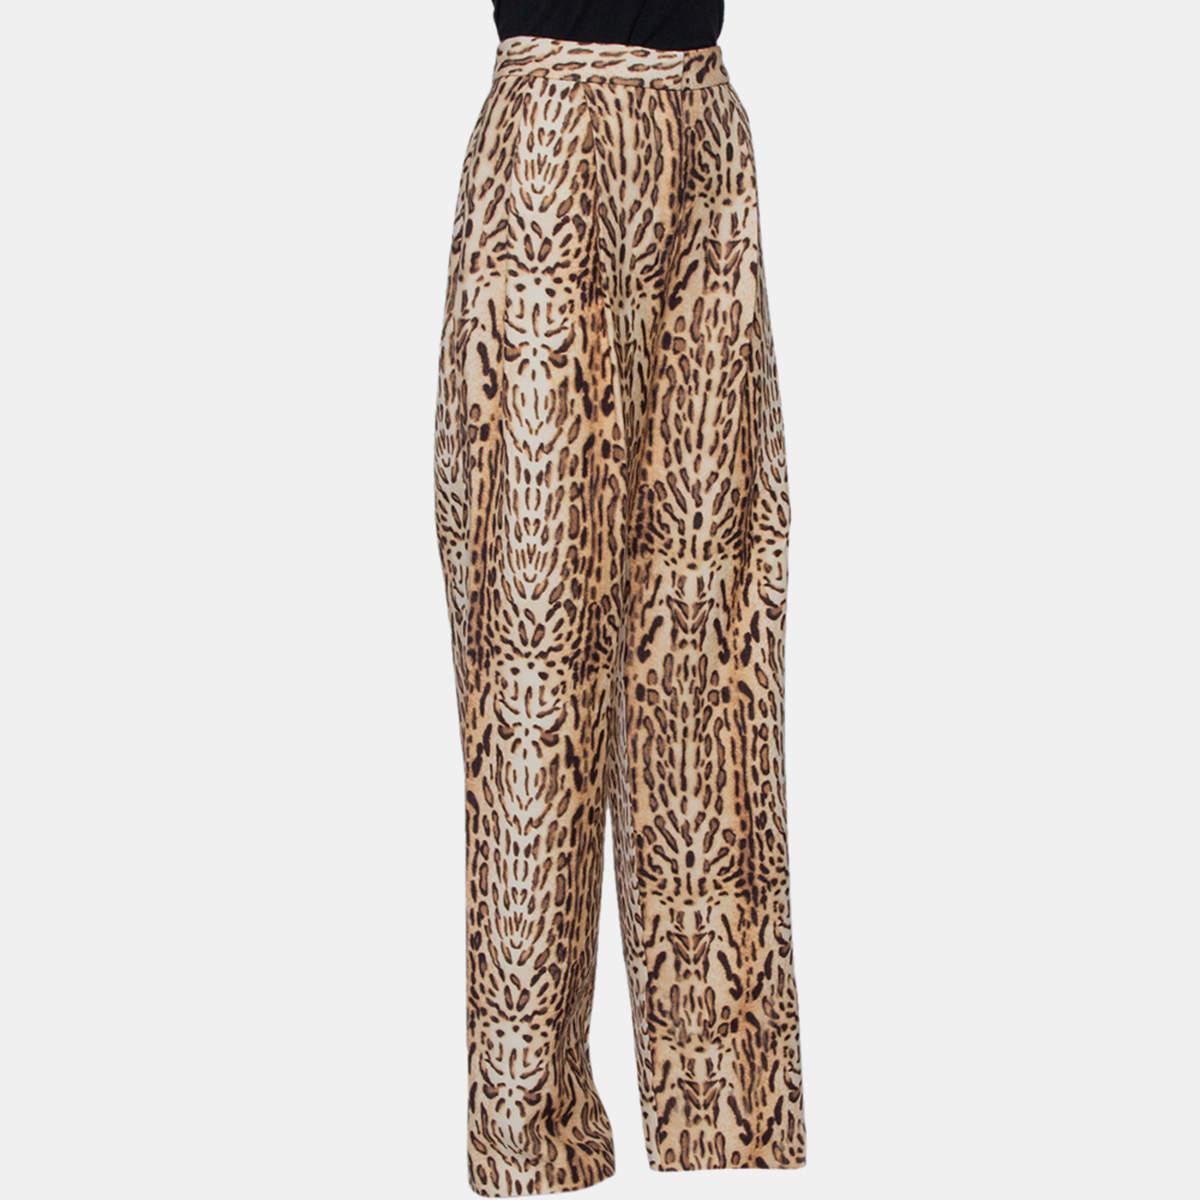 Adam Lippes Beige Animal Printed Wool Palazzo Pants S In New Condition For Sale In Dubai, Al Qouz 2